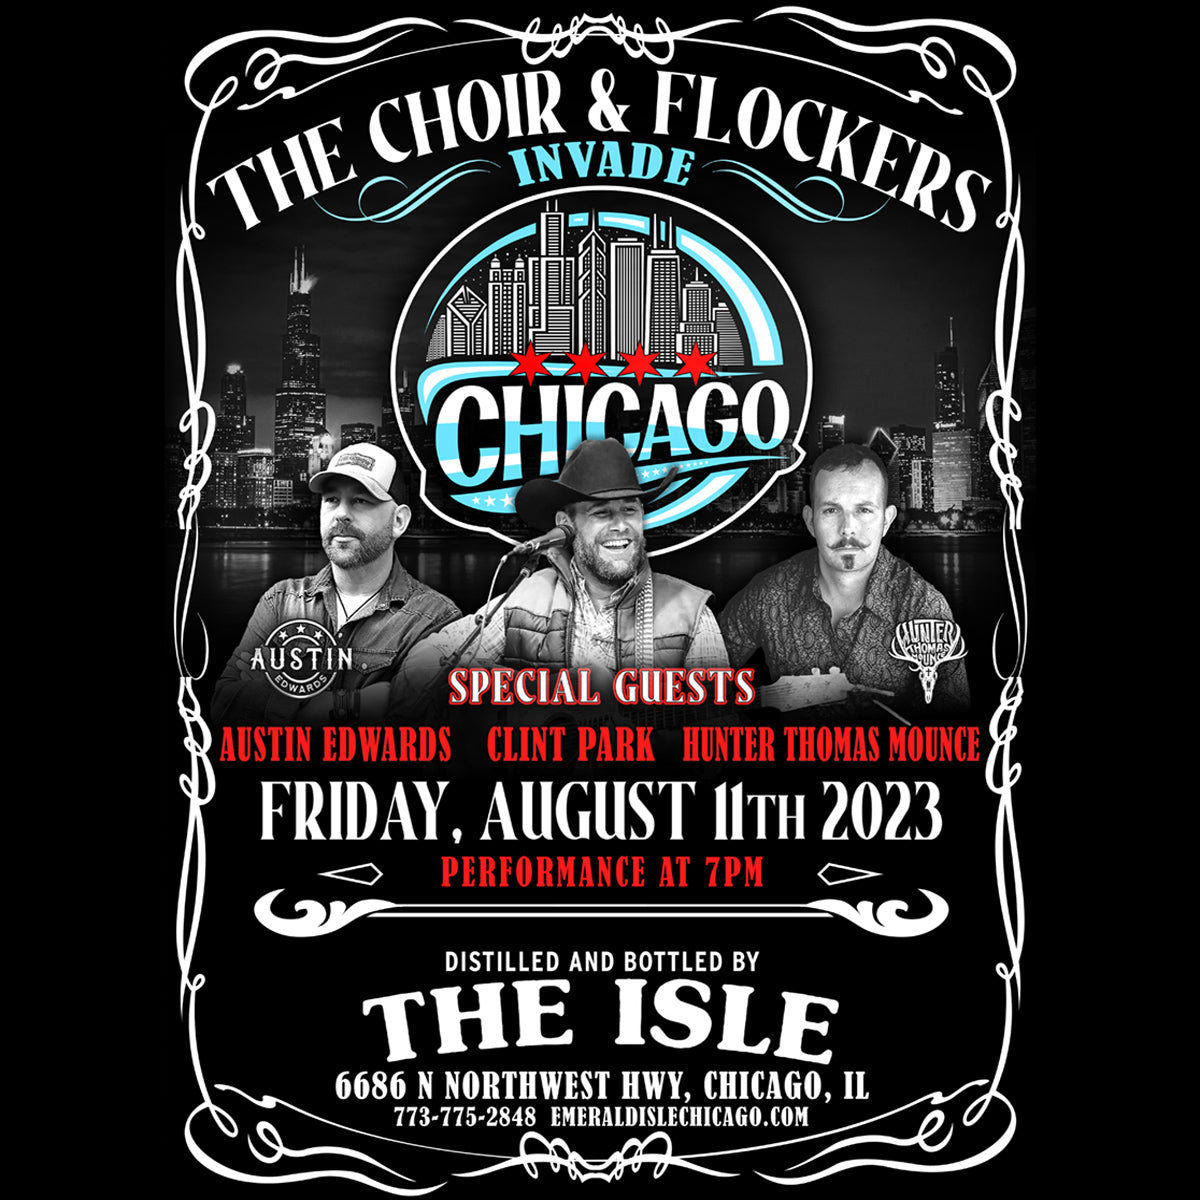 The Choir & Flockers Invade Chicago benefitting Special Olympics Chicago/Special Children's Charities